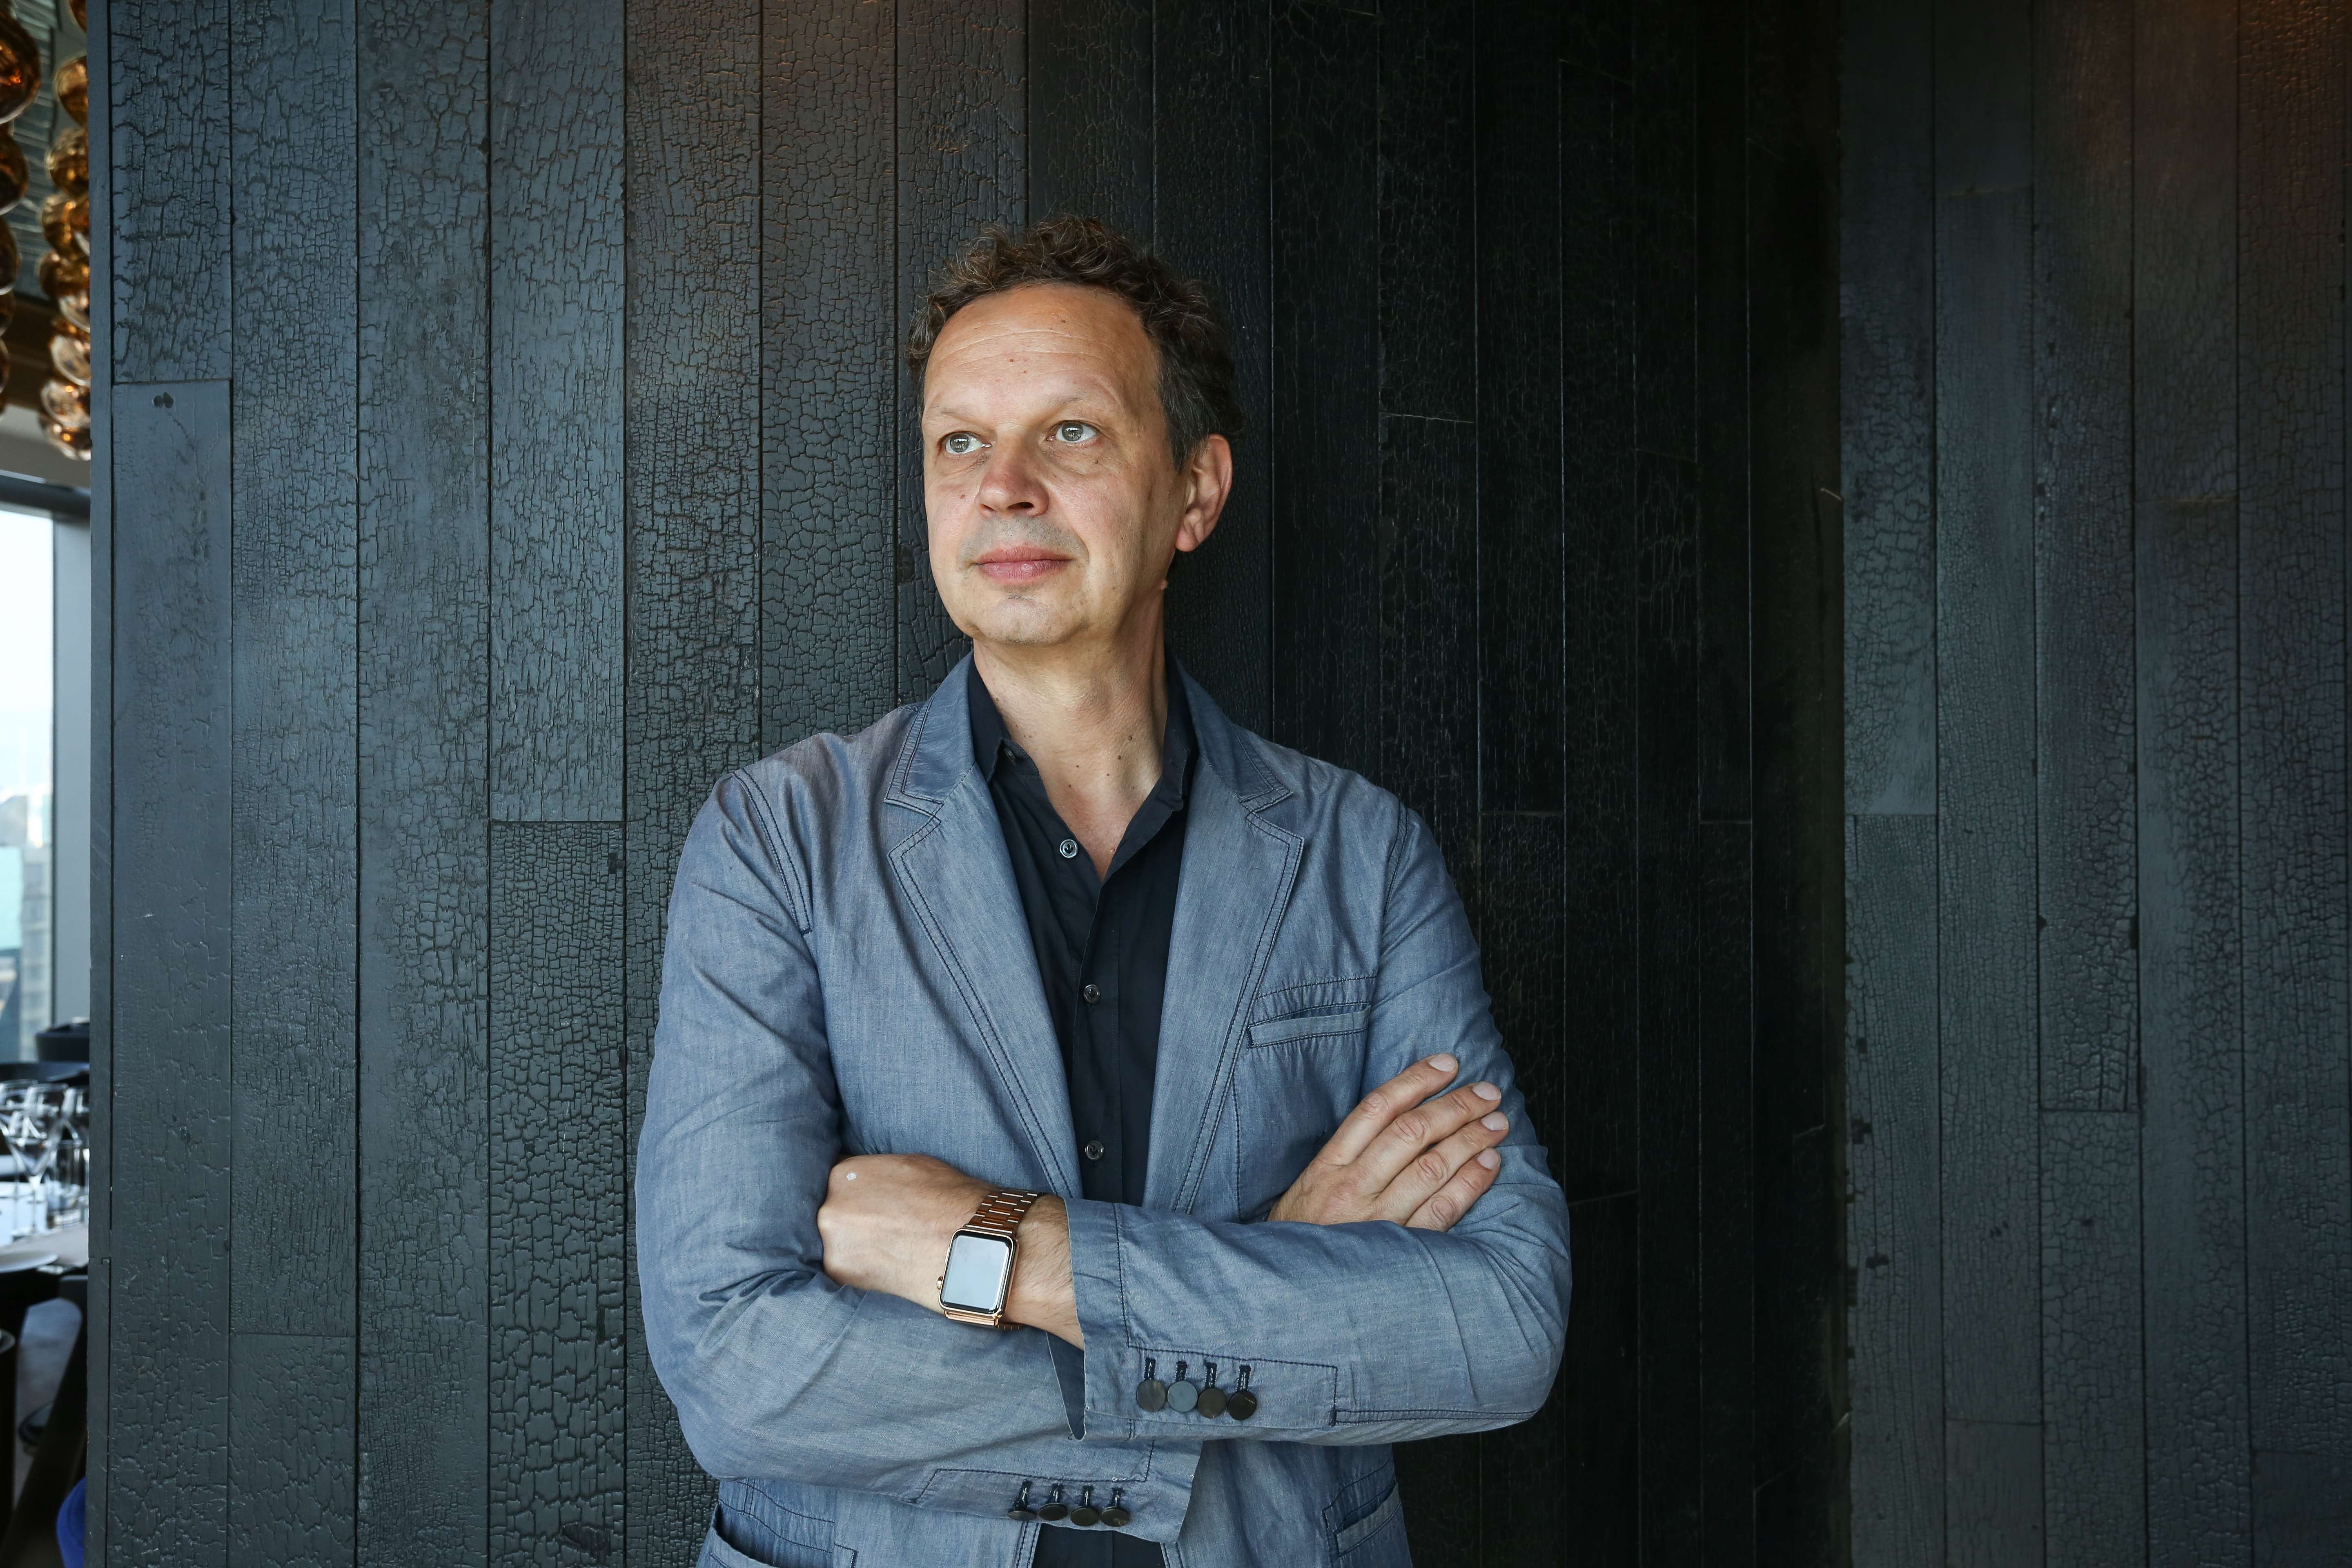 Tom Dixon expects to see another design revolution soon, possibly in nanotechnology or biotechnology. Photo: Jonathan Wong